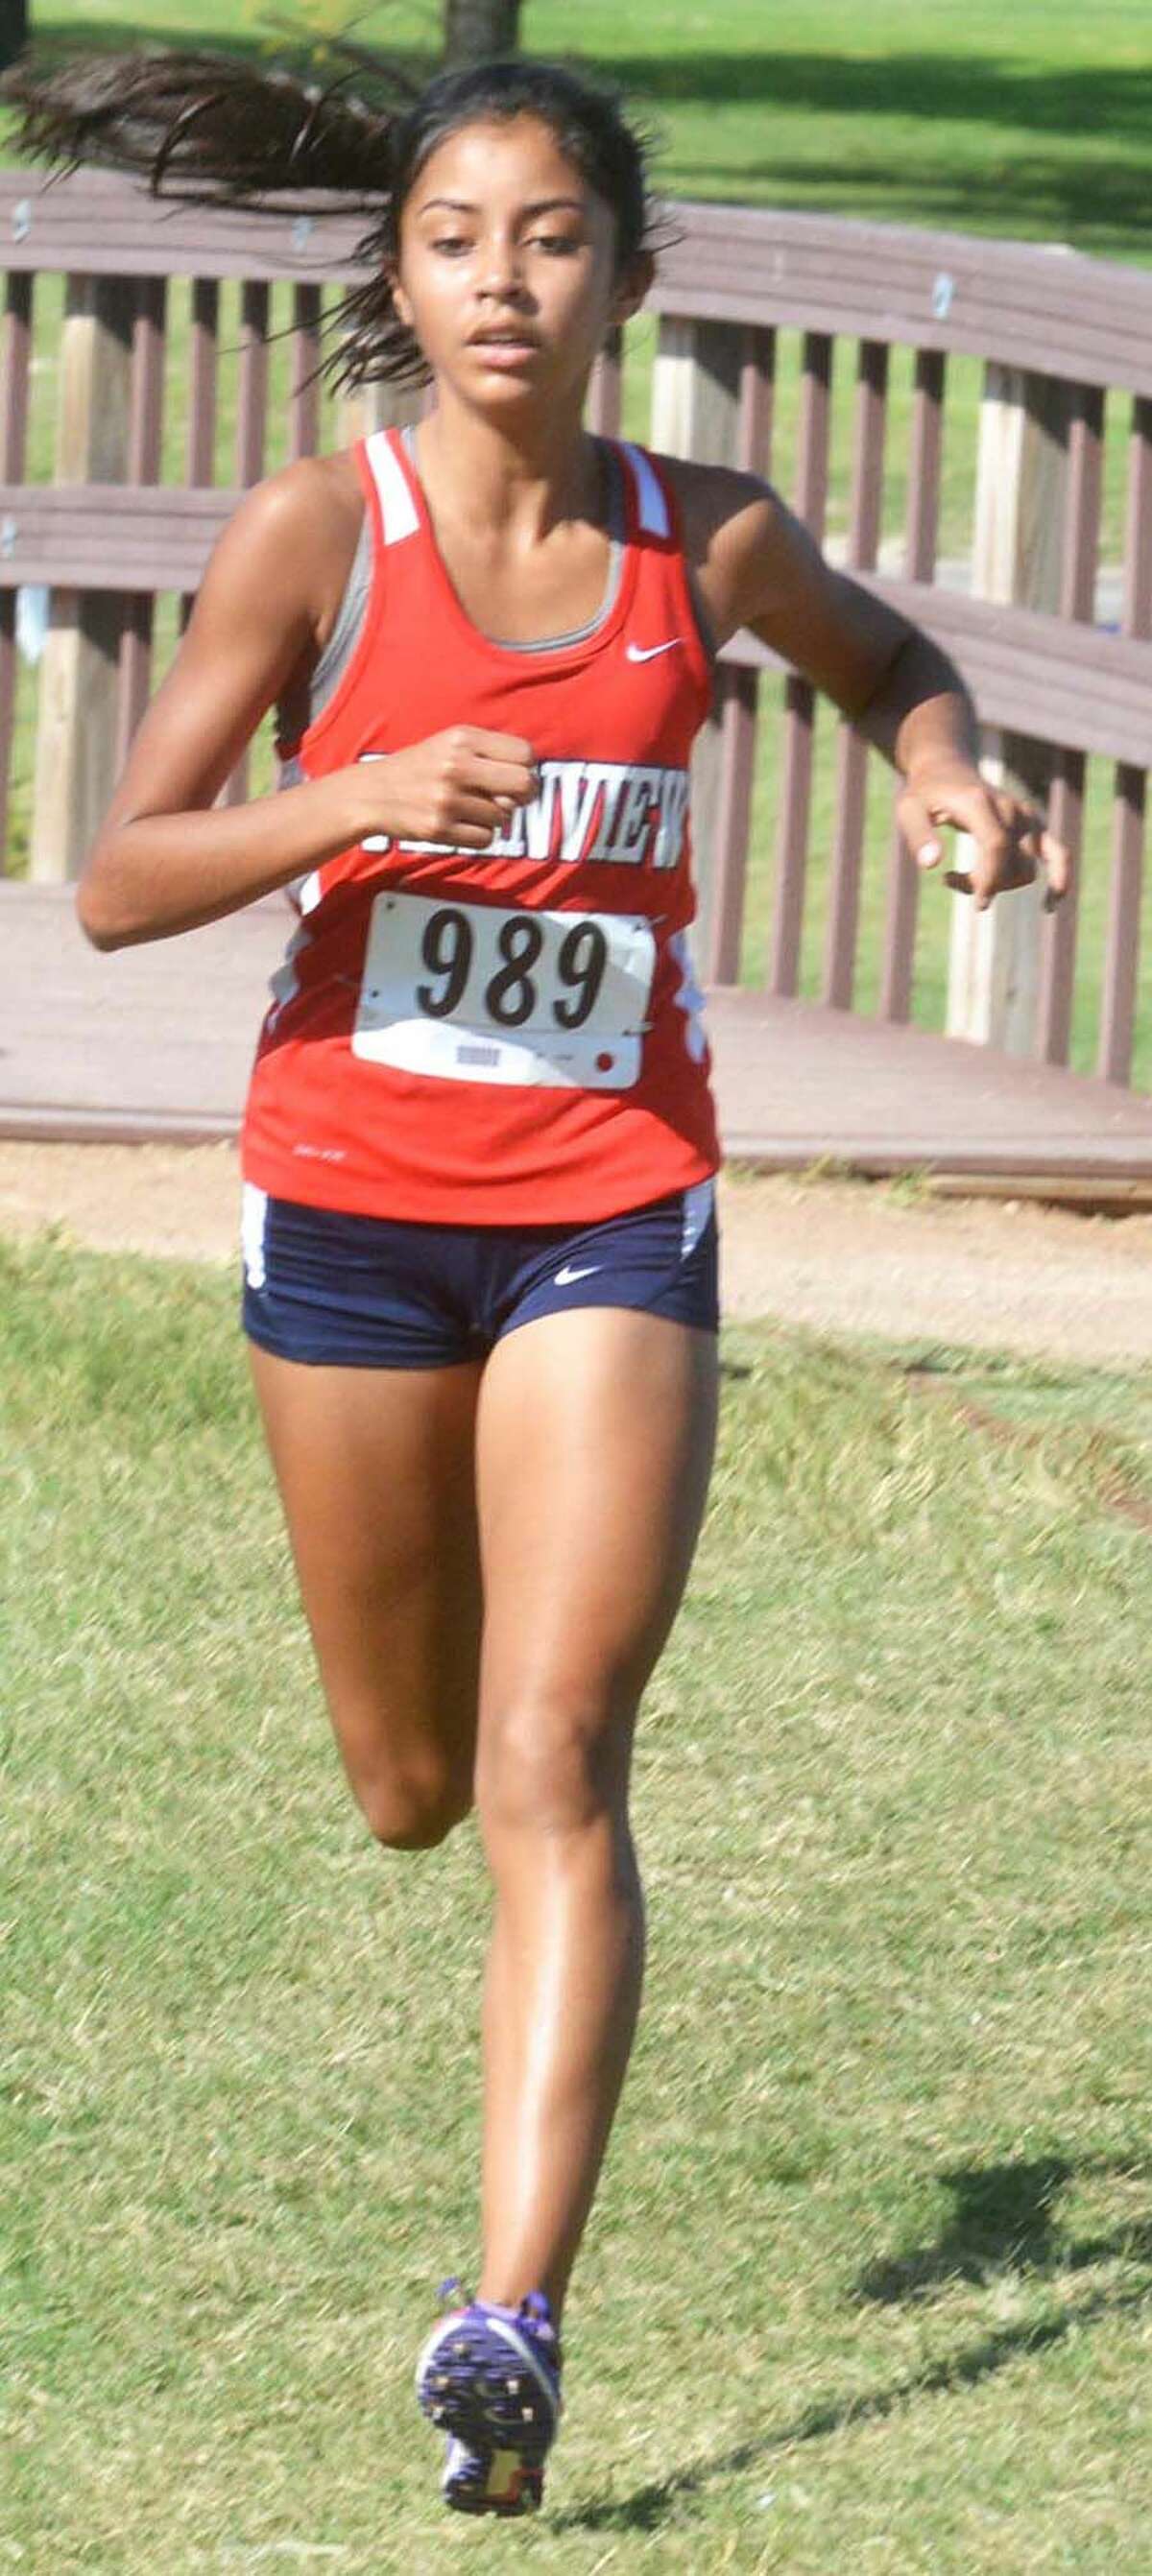 Plainview's Kristan Rincon finished 27th overall at the regional meet at Mae Simmons Park Monday. Even though she improved her district time on the same course by nearly a minute and a half, Rincon missed out on qualifying for the state meet by one place and less than three seconds.